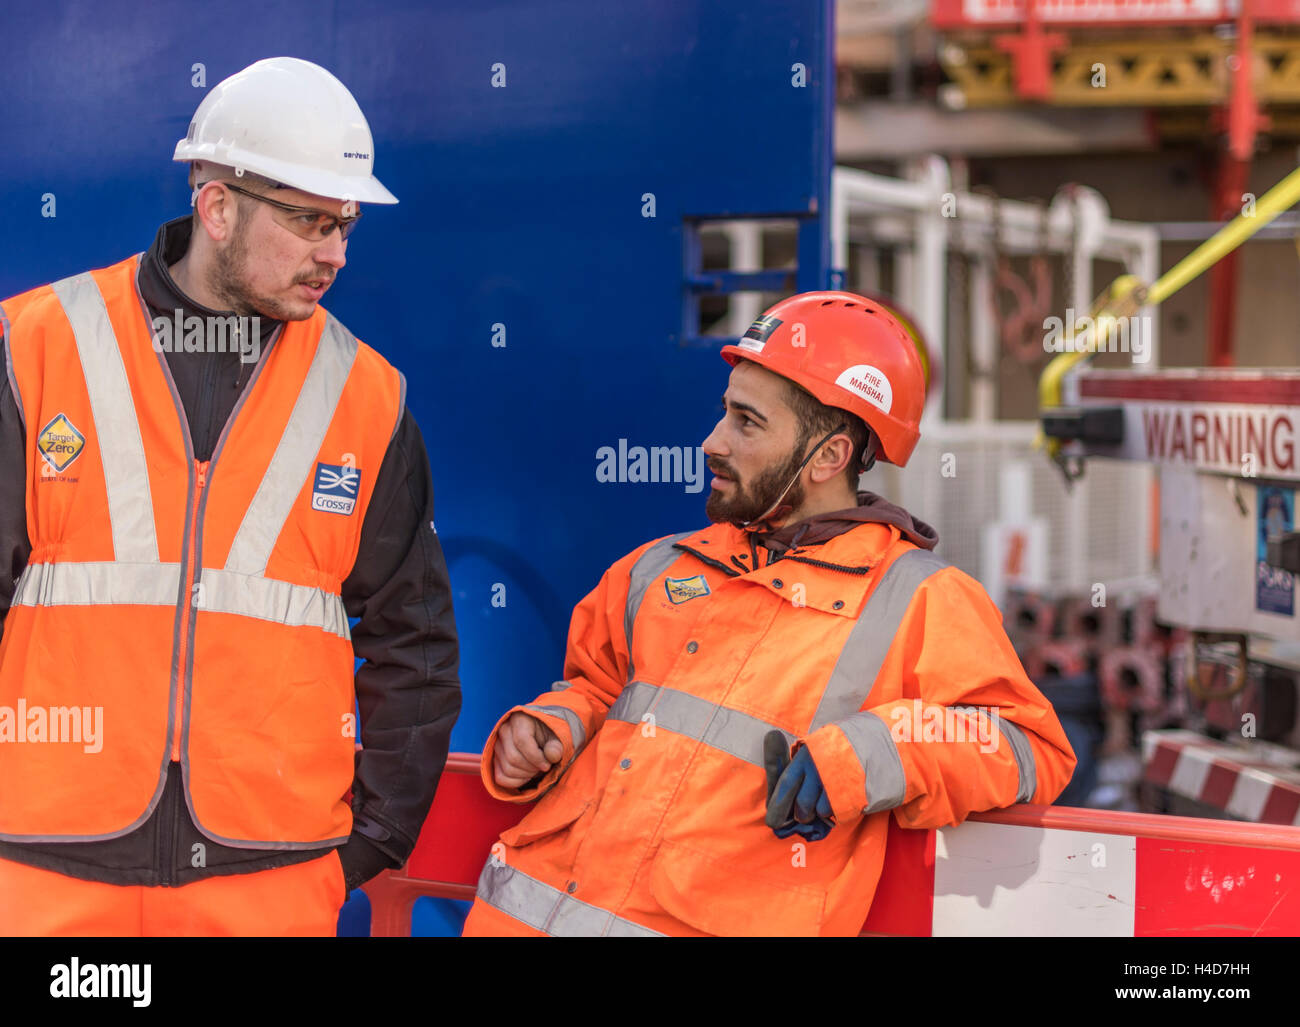 Two builders on site in orange safety clothing and hard hats Stock Photo